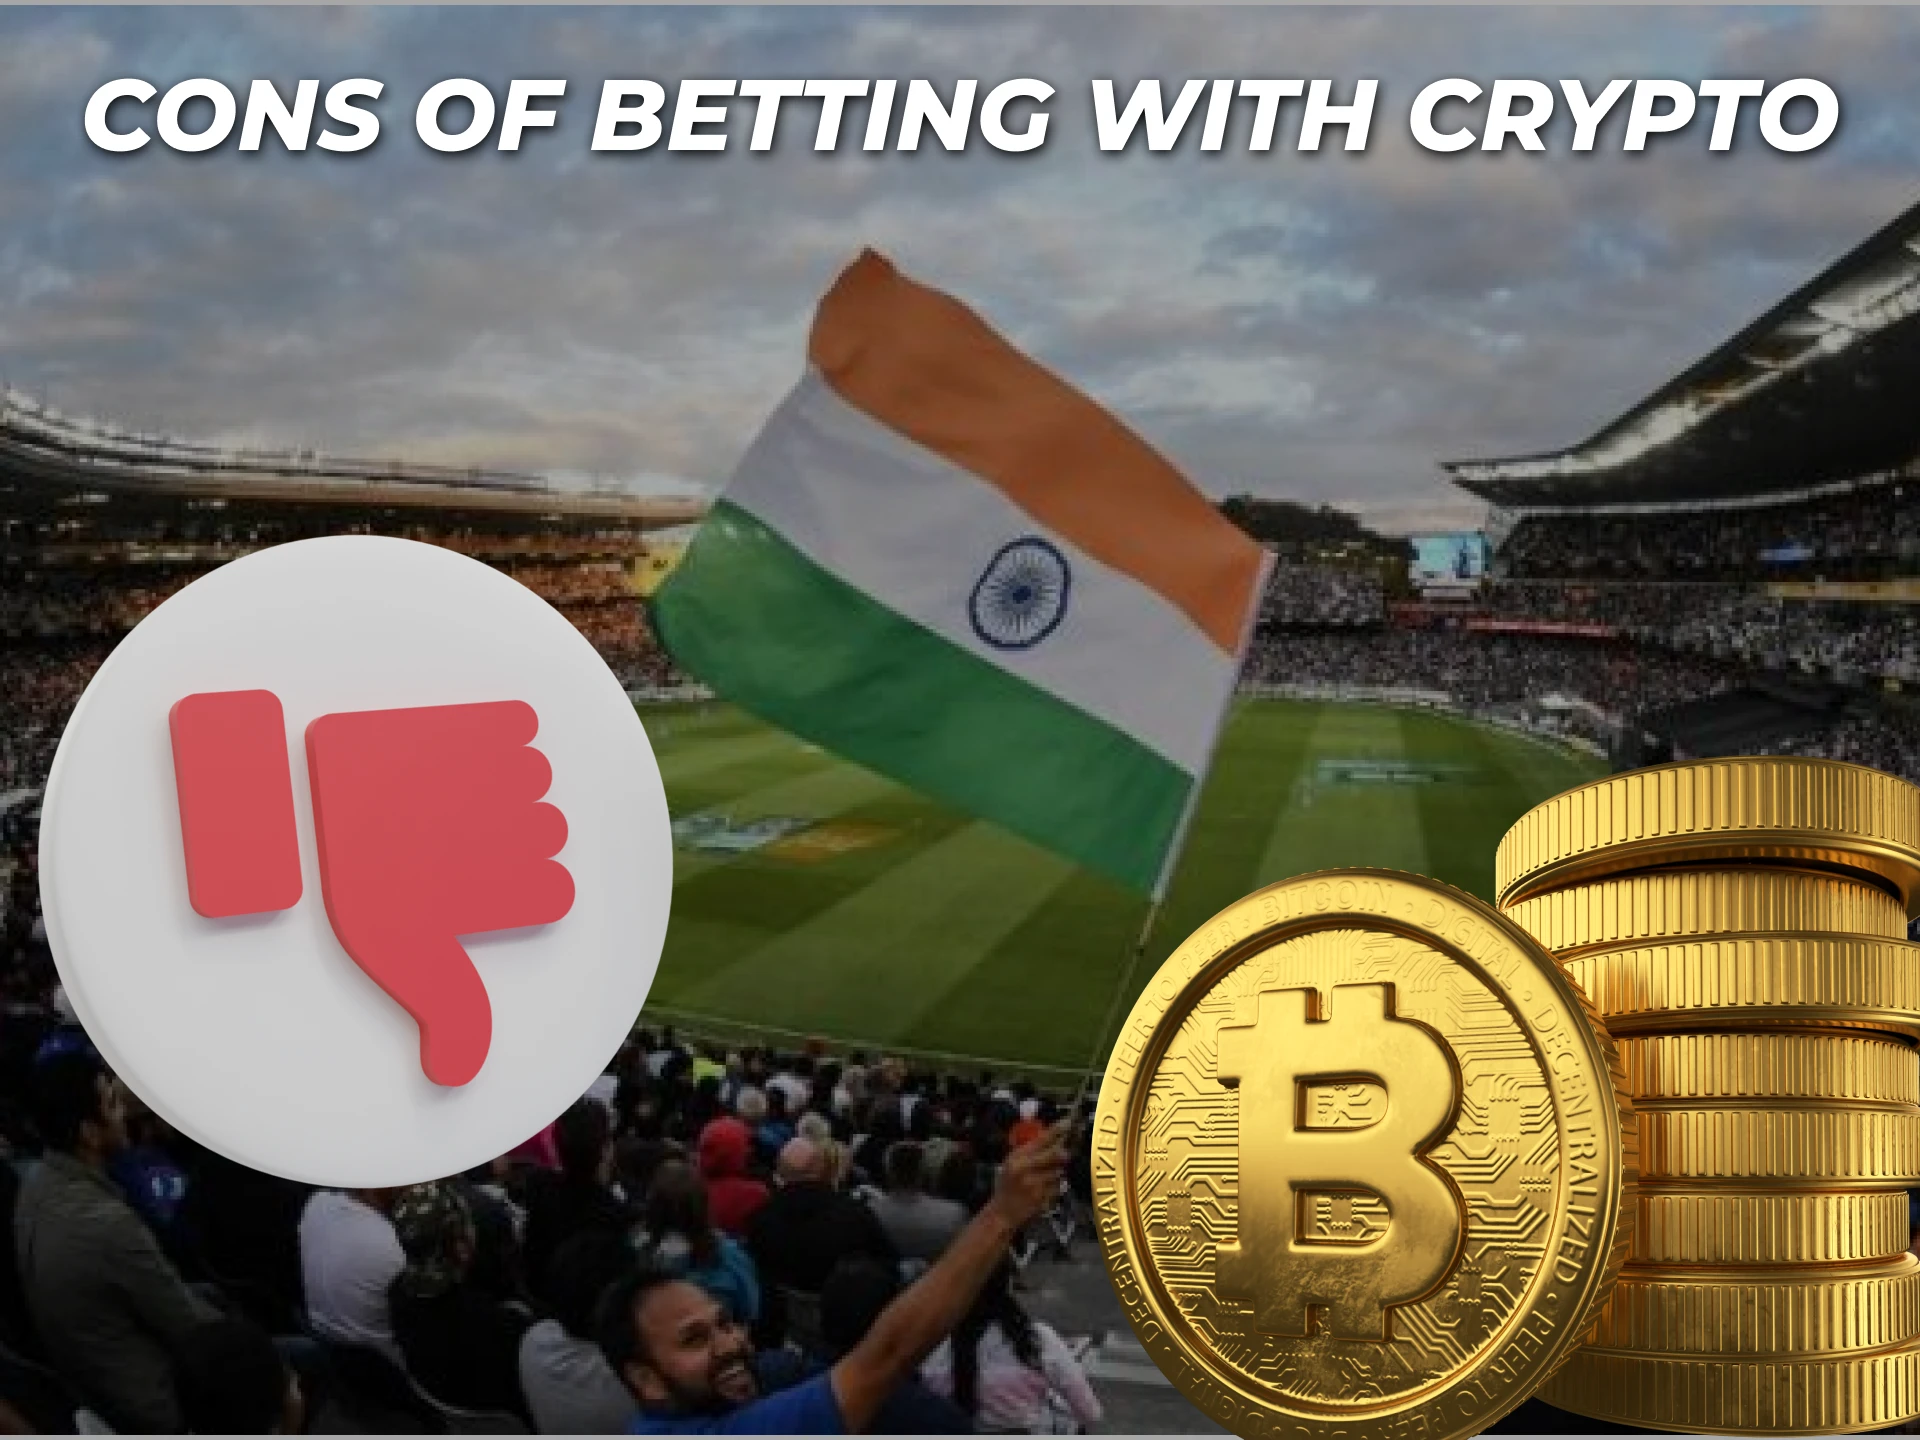 Find out what are the disadvantages of sports betting using cryptocurrency.